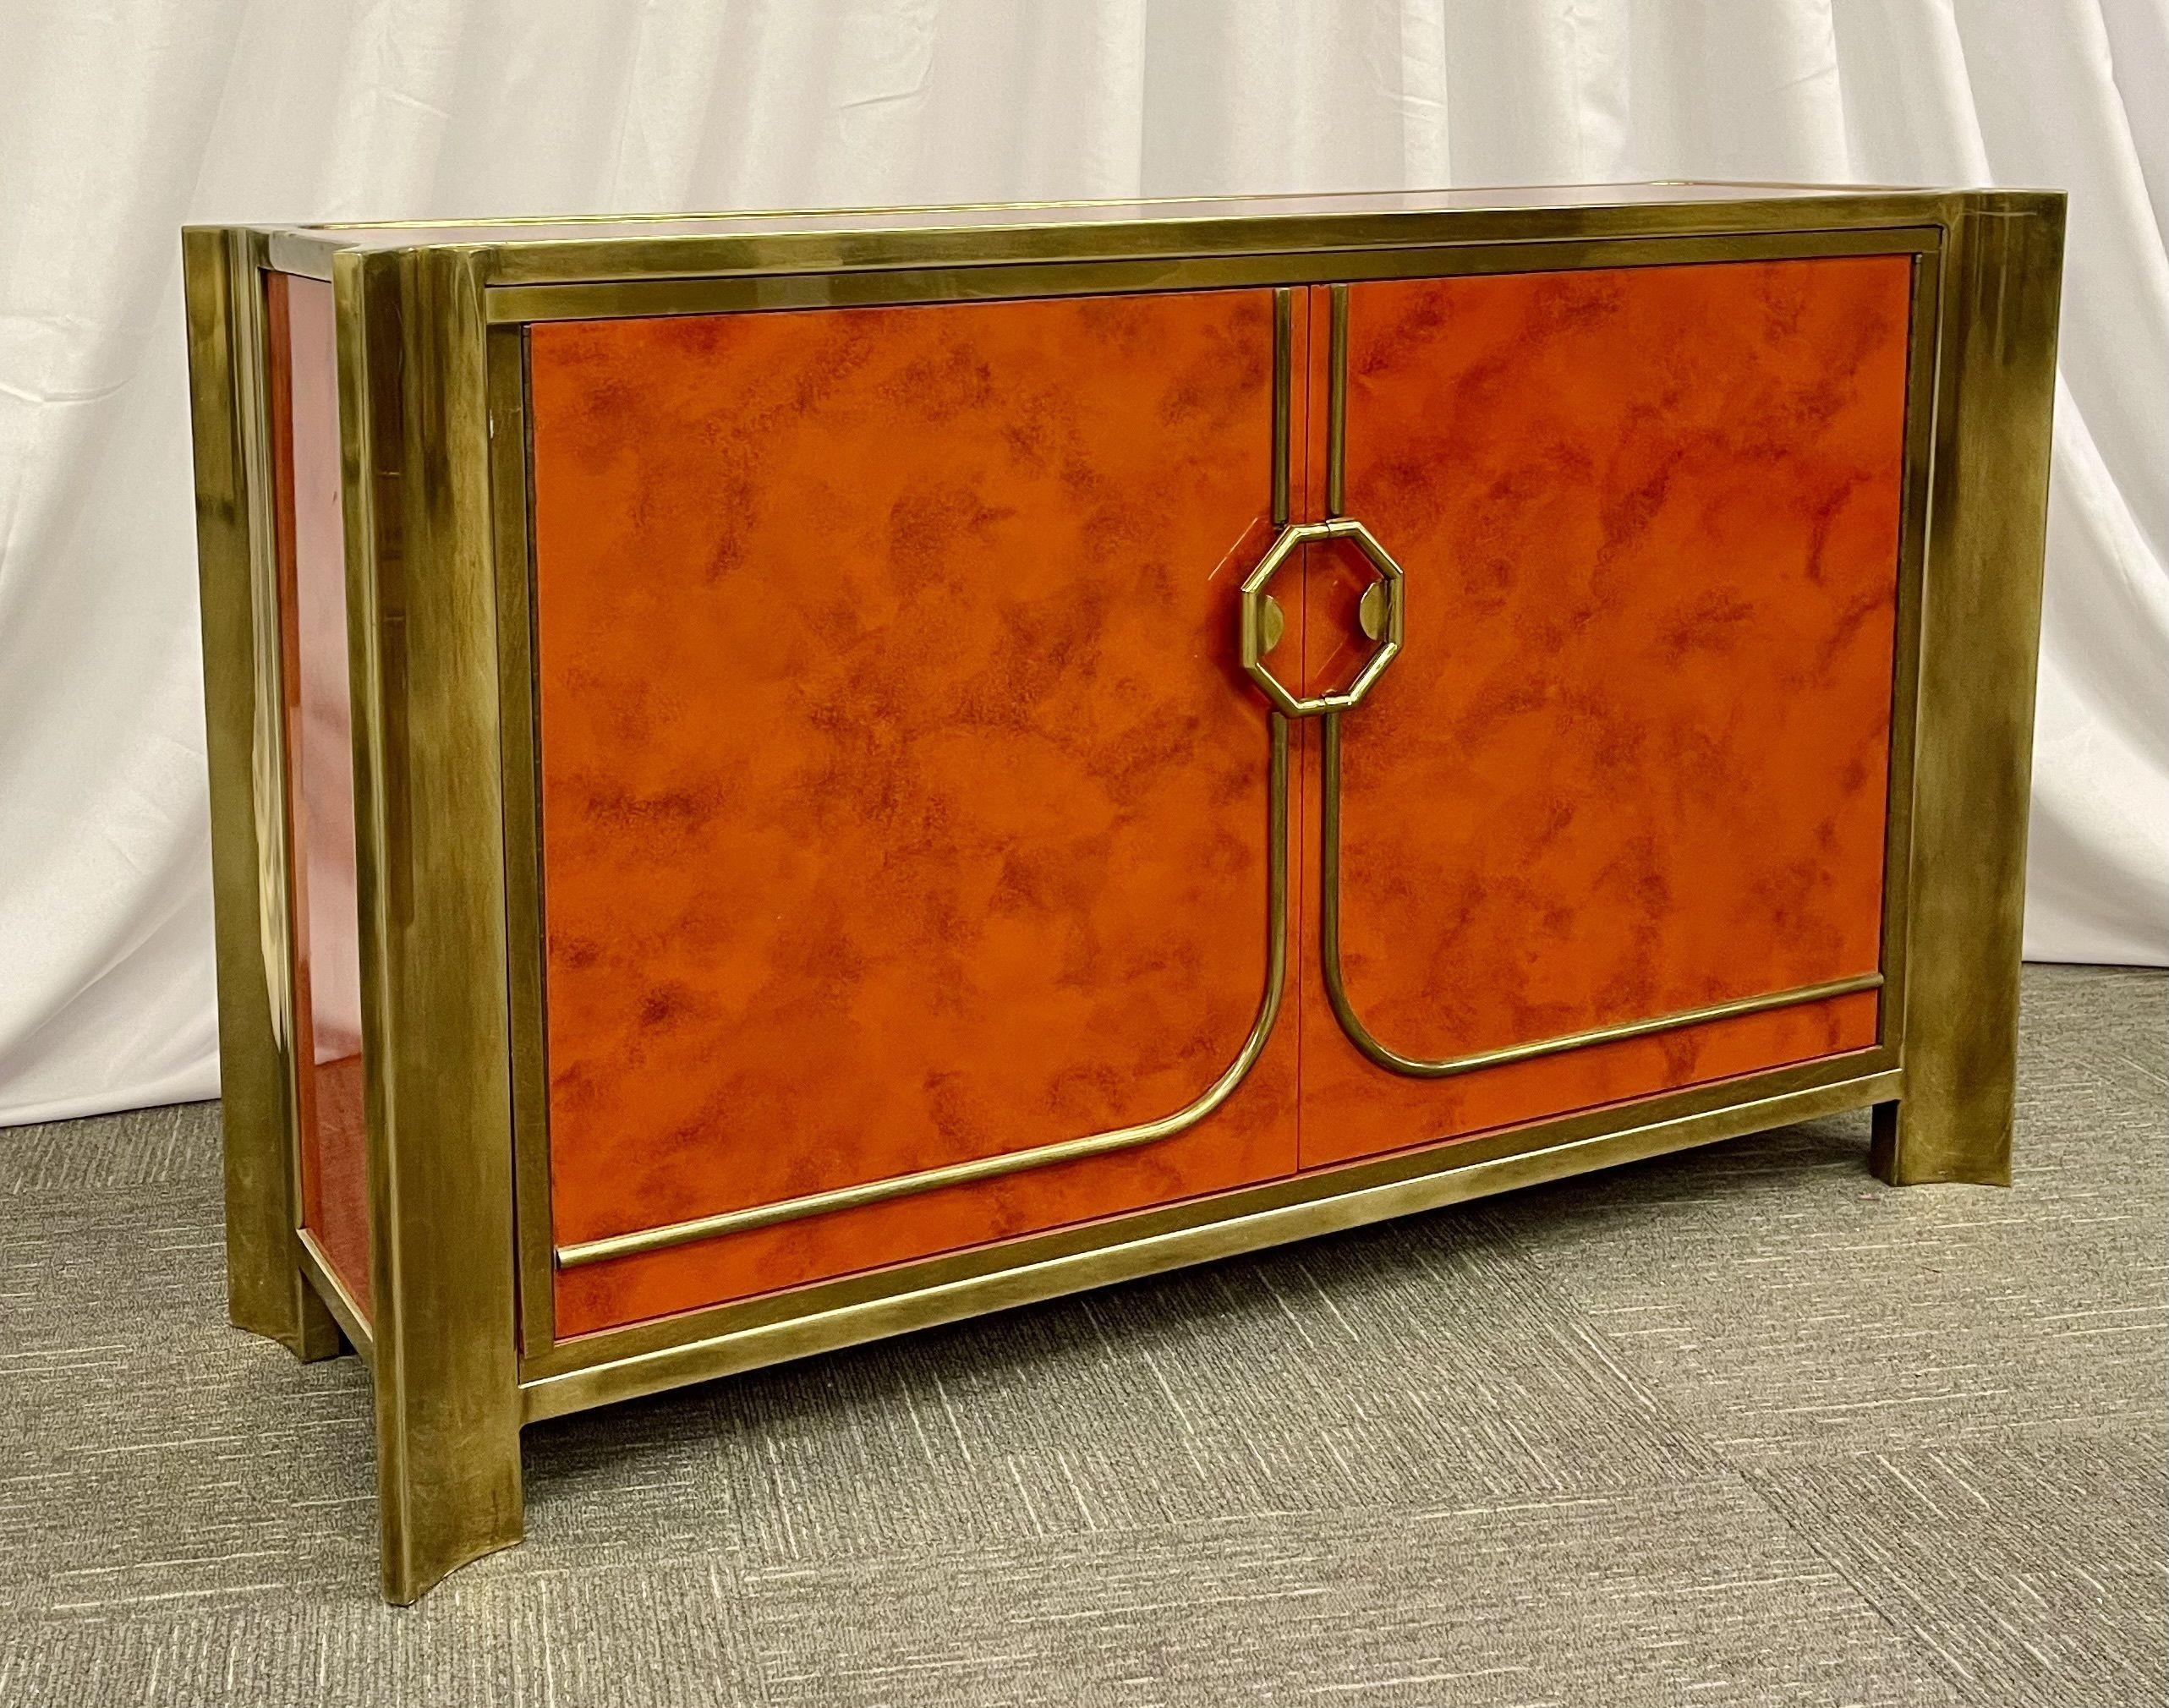 North American Mid-Century Modern Small Cabinet by Mastercraft, Lacquer, Brass, American, 1980s For Sale